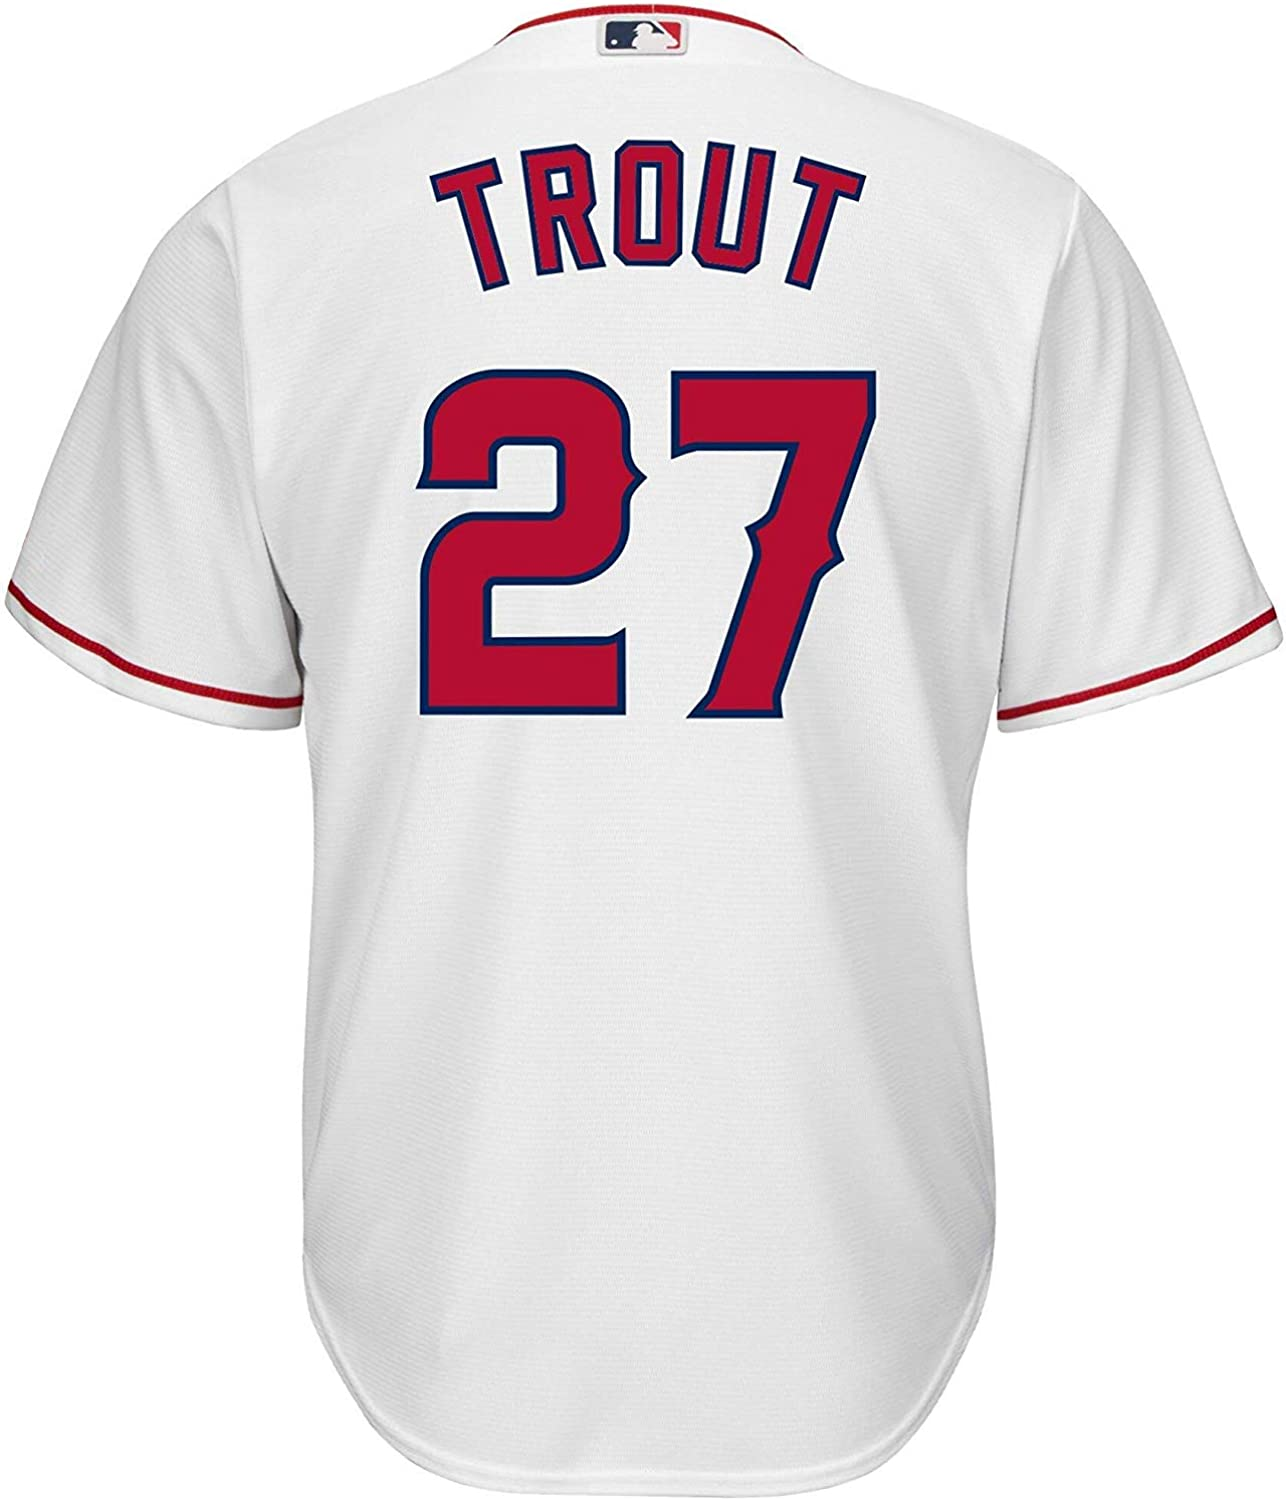 trout angels jersey